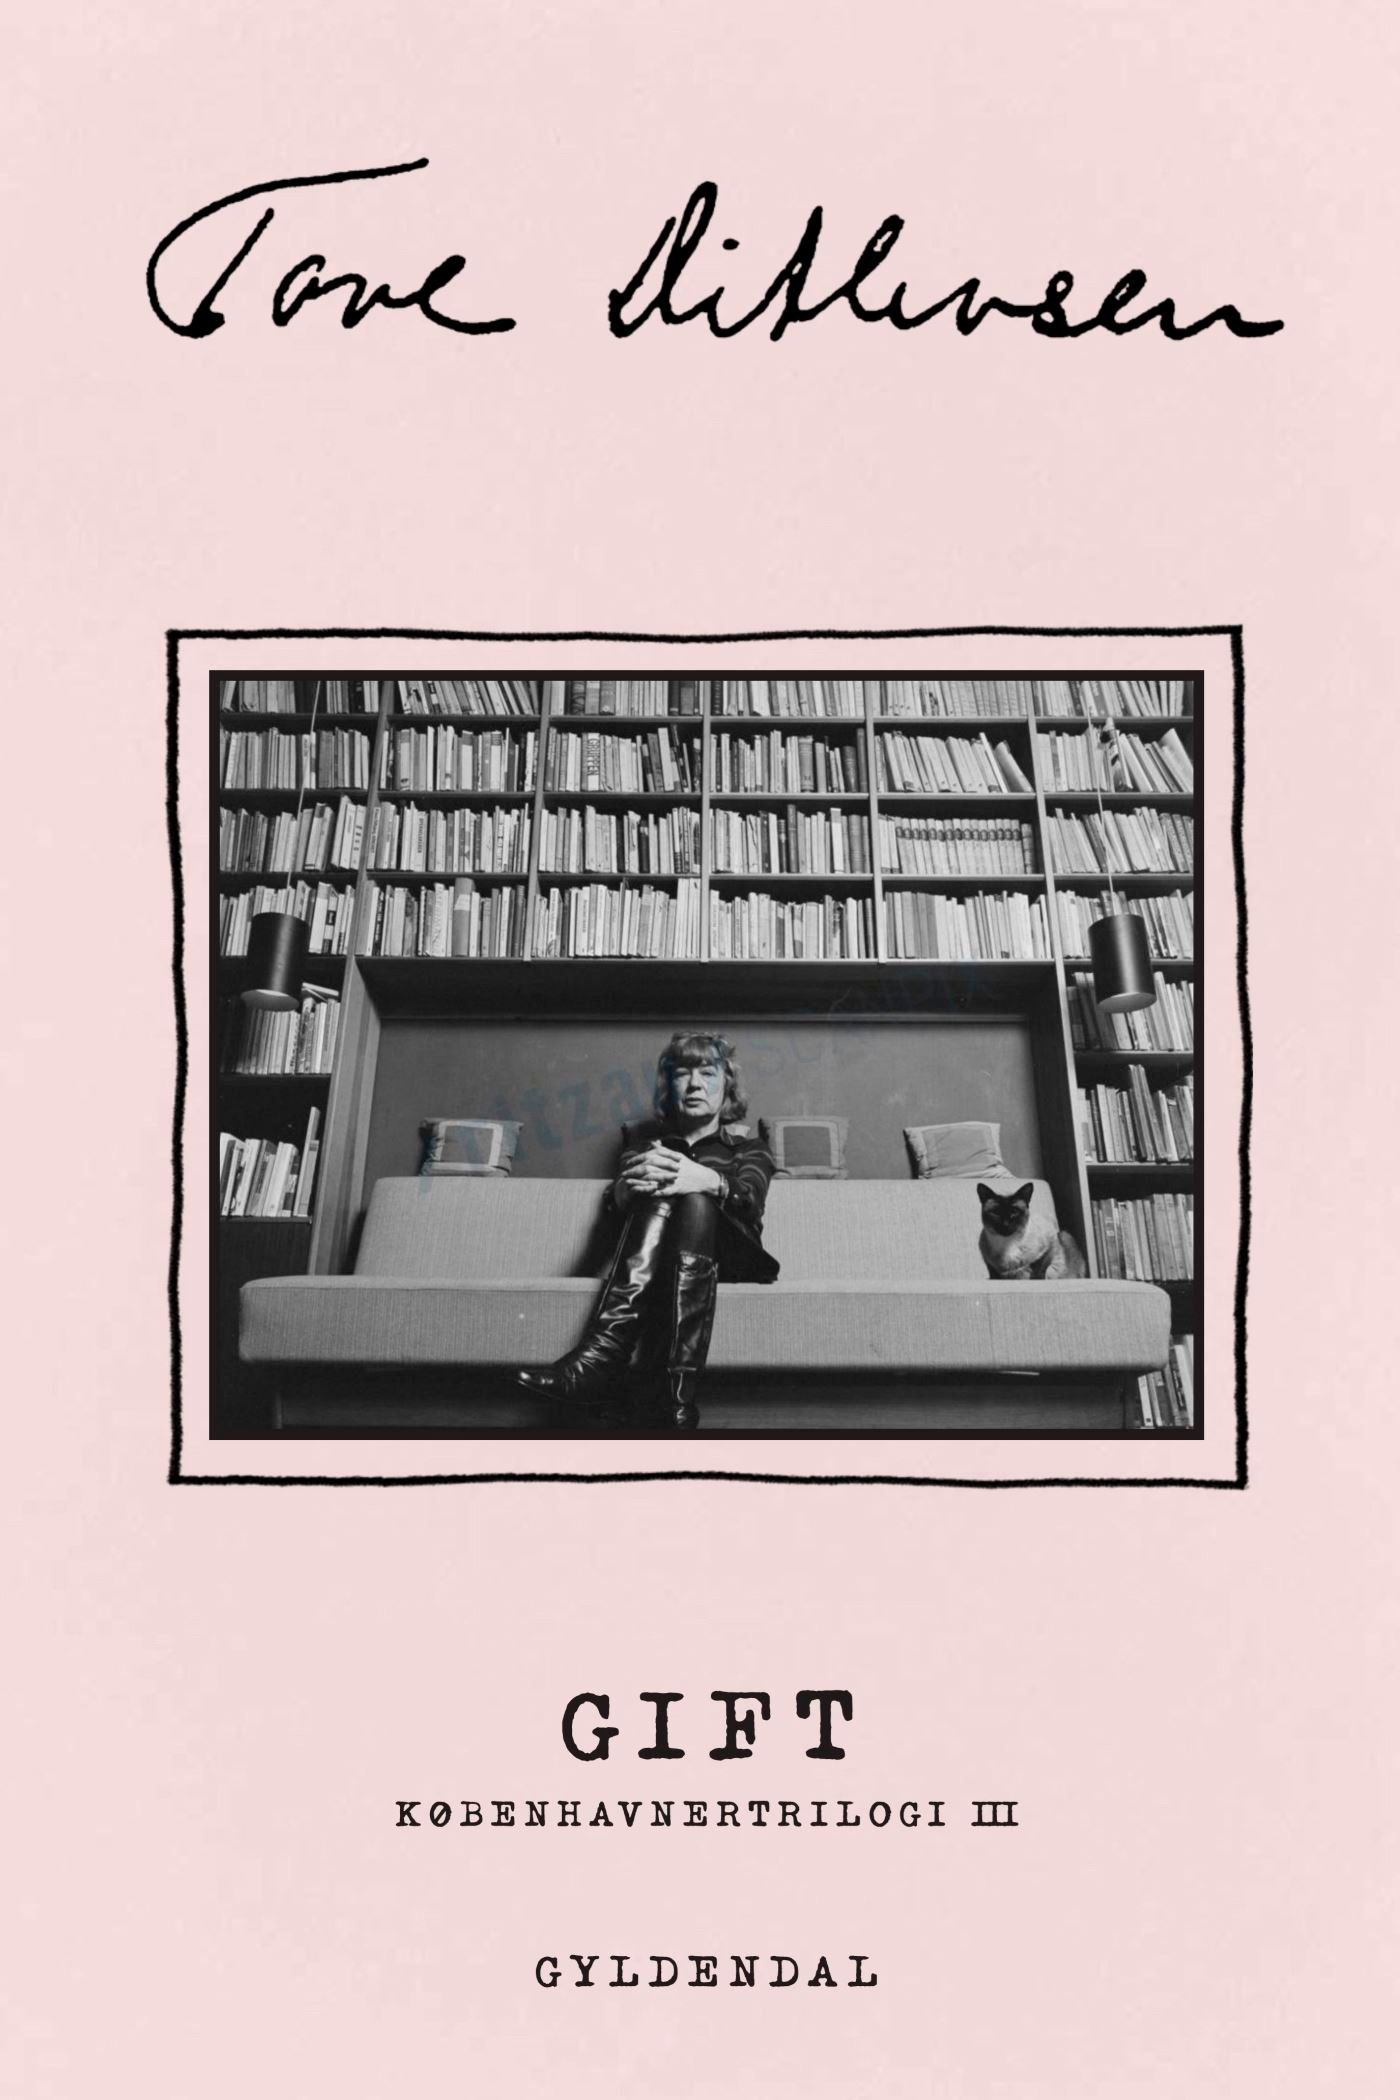 Gift, eBook by Tove Ditlevsen